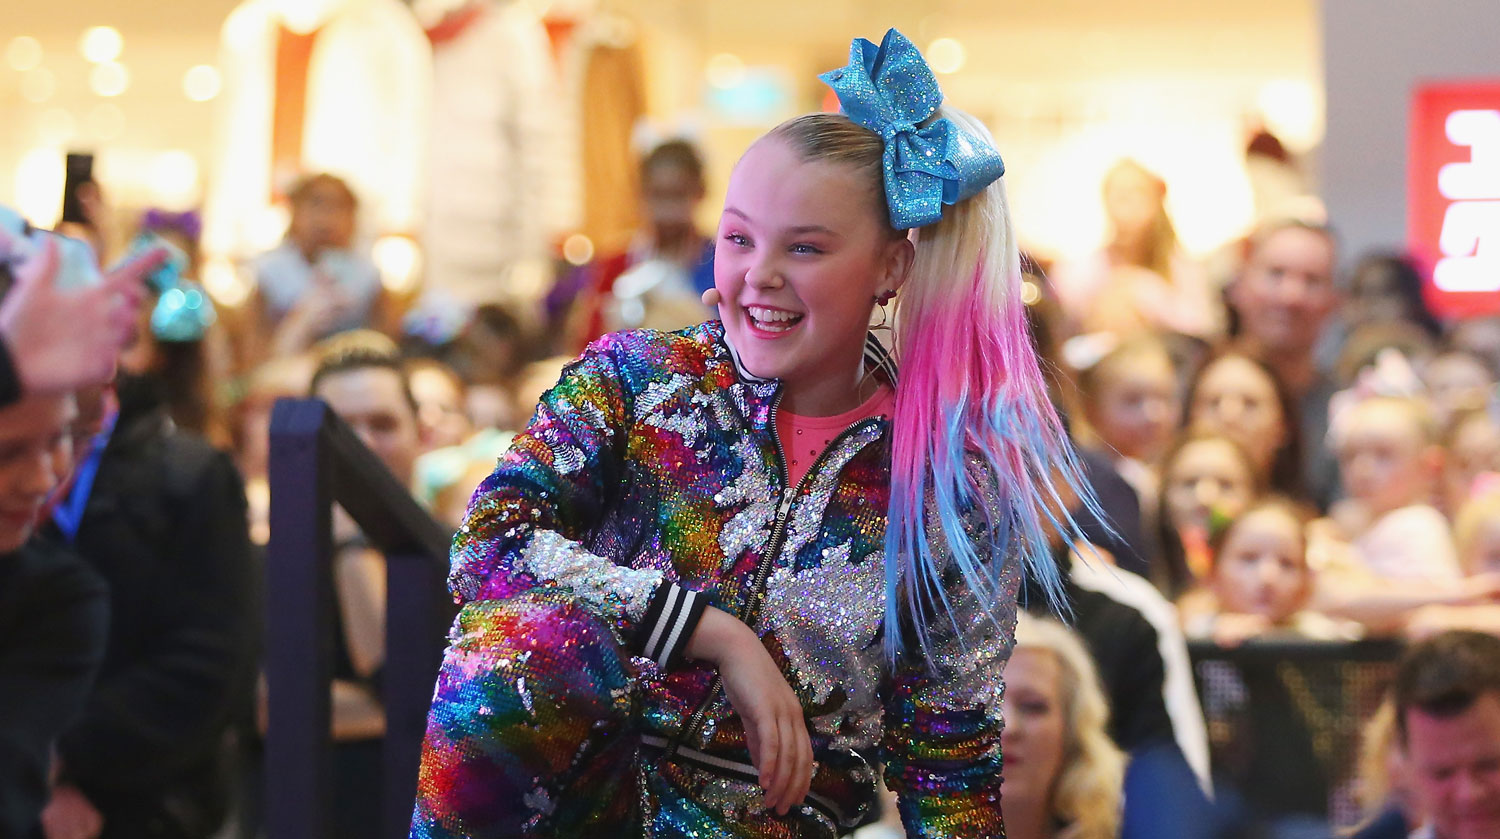 JoJo Siwa Fans Camp Out From 4am to Watch Her Sydney Concert! 